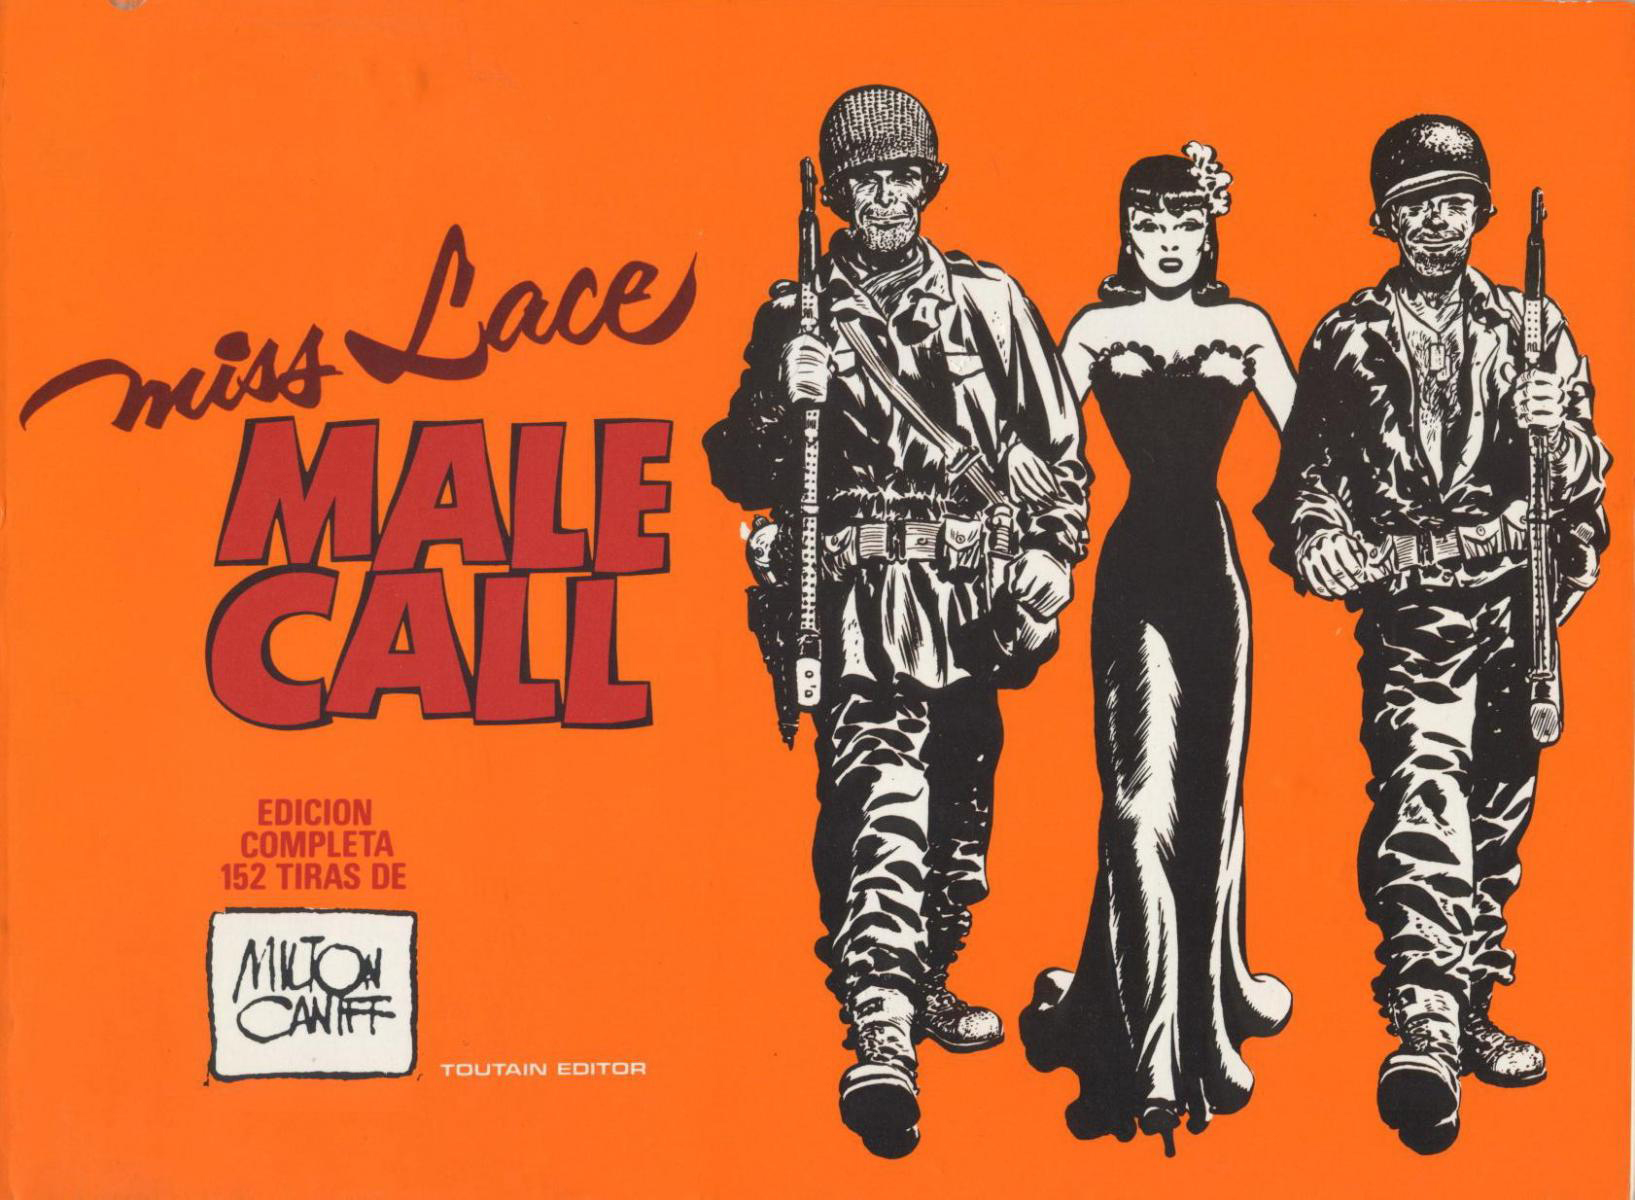 Miss Lace Male Call  1943